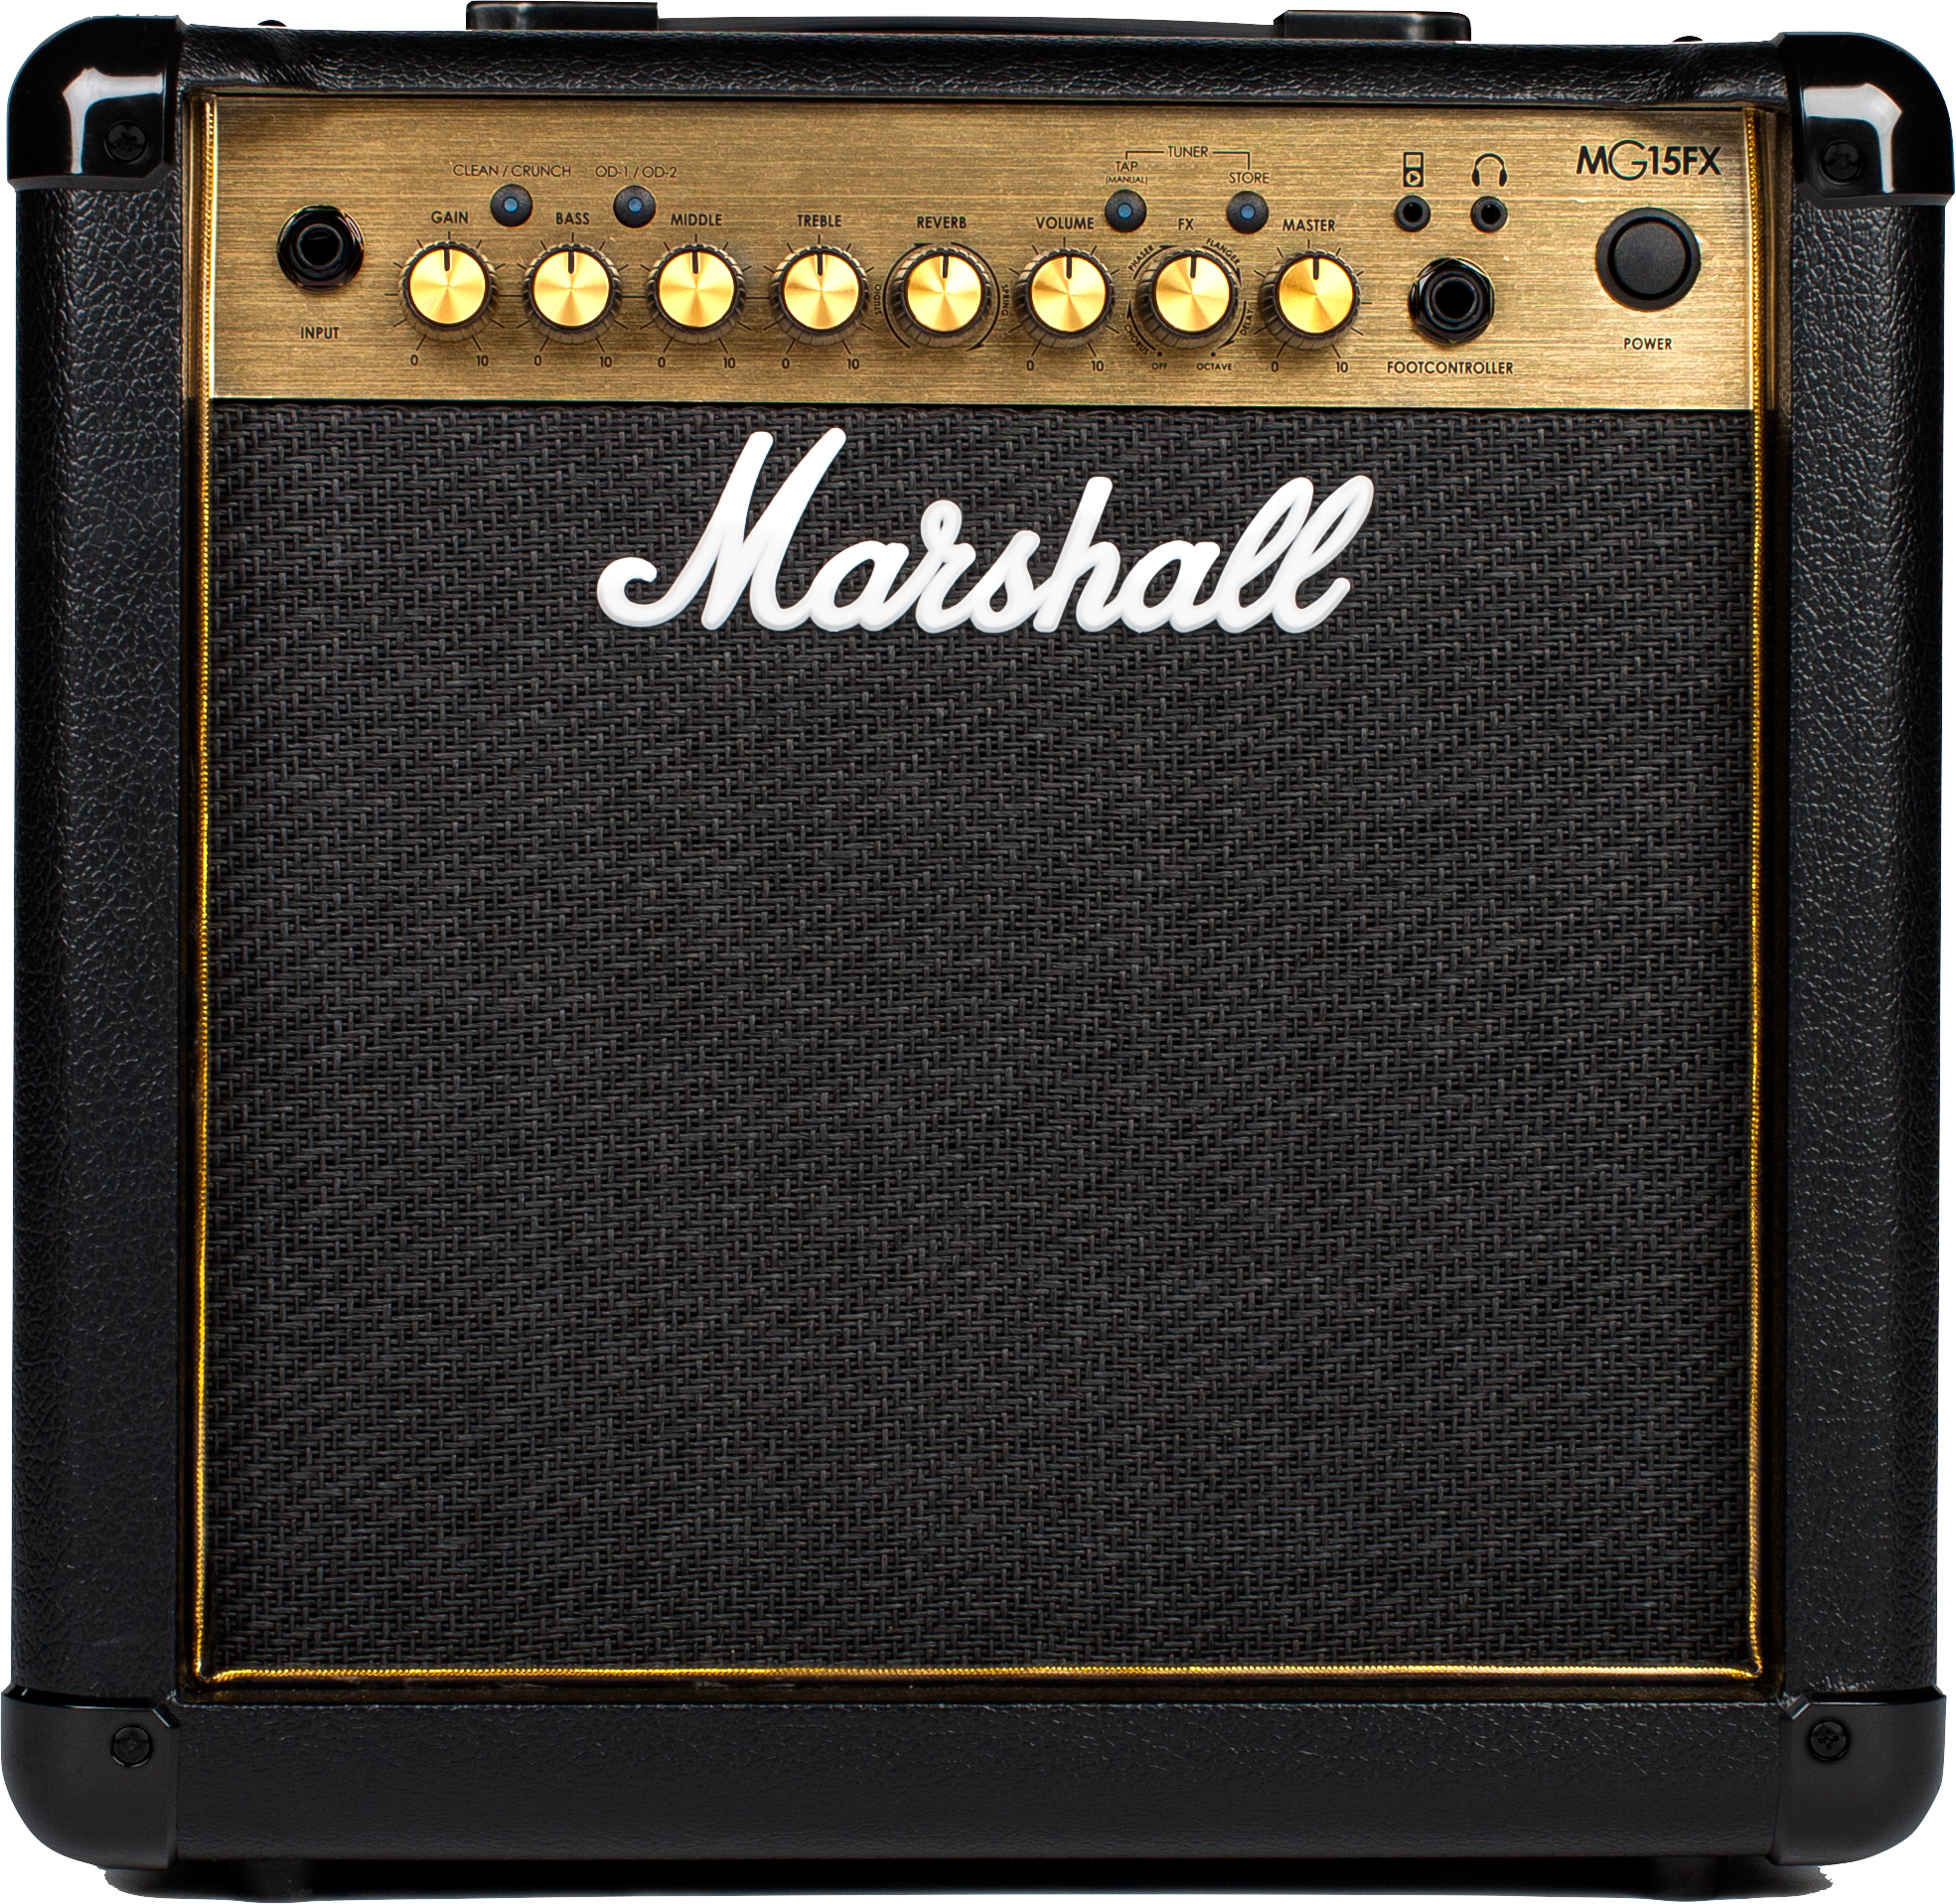 Marshall Mg15fx Mg Gold 15w 1x8 - Ampli Guitare Électrique Combo - Variation 1